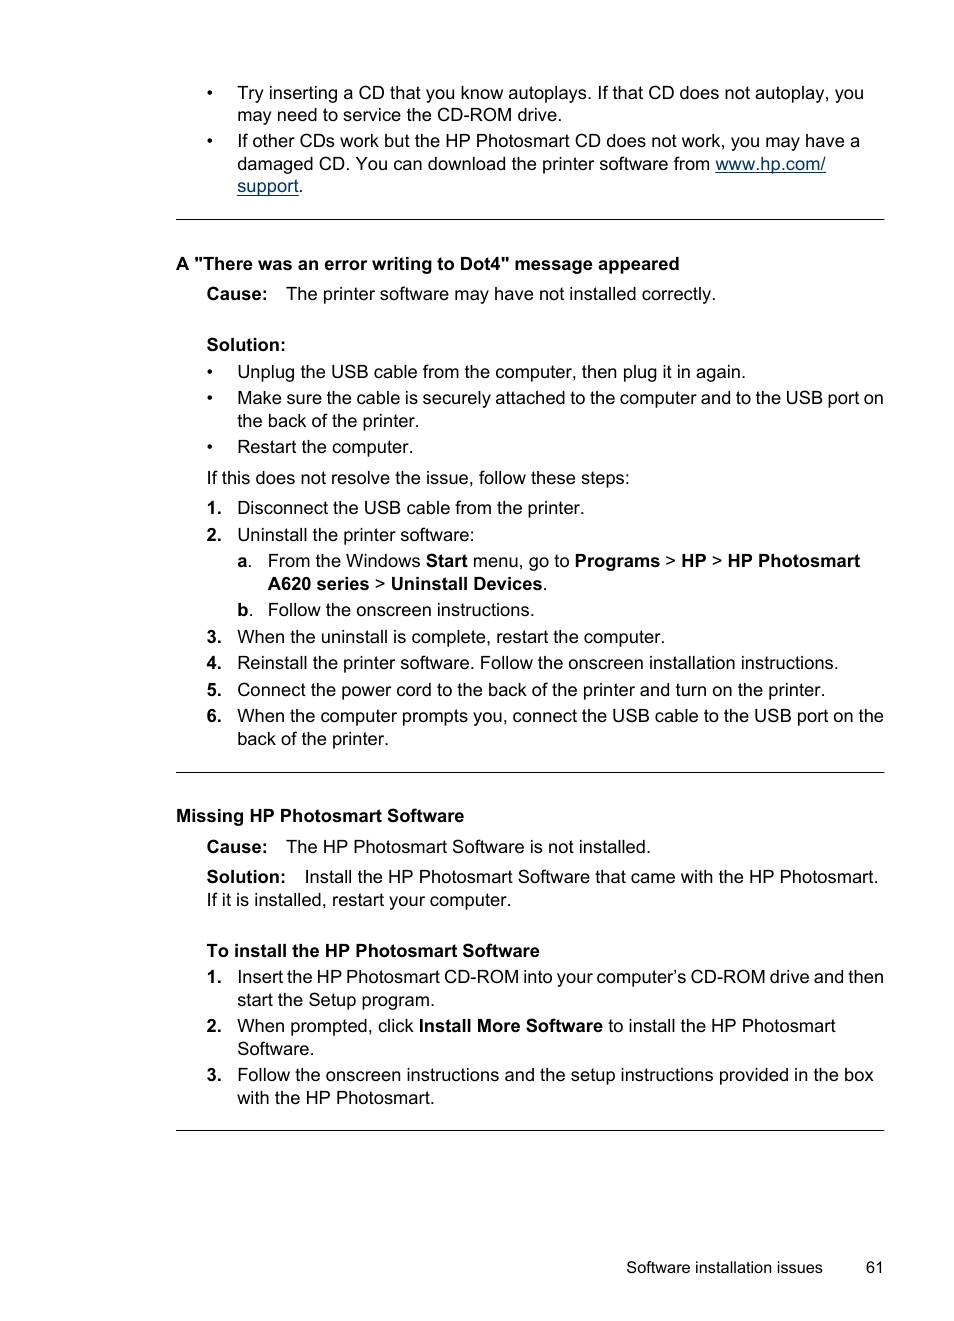 Missing hp photosmart software | HP PhotoSmart A620 Series User Manual |  Page 62 / 88